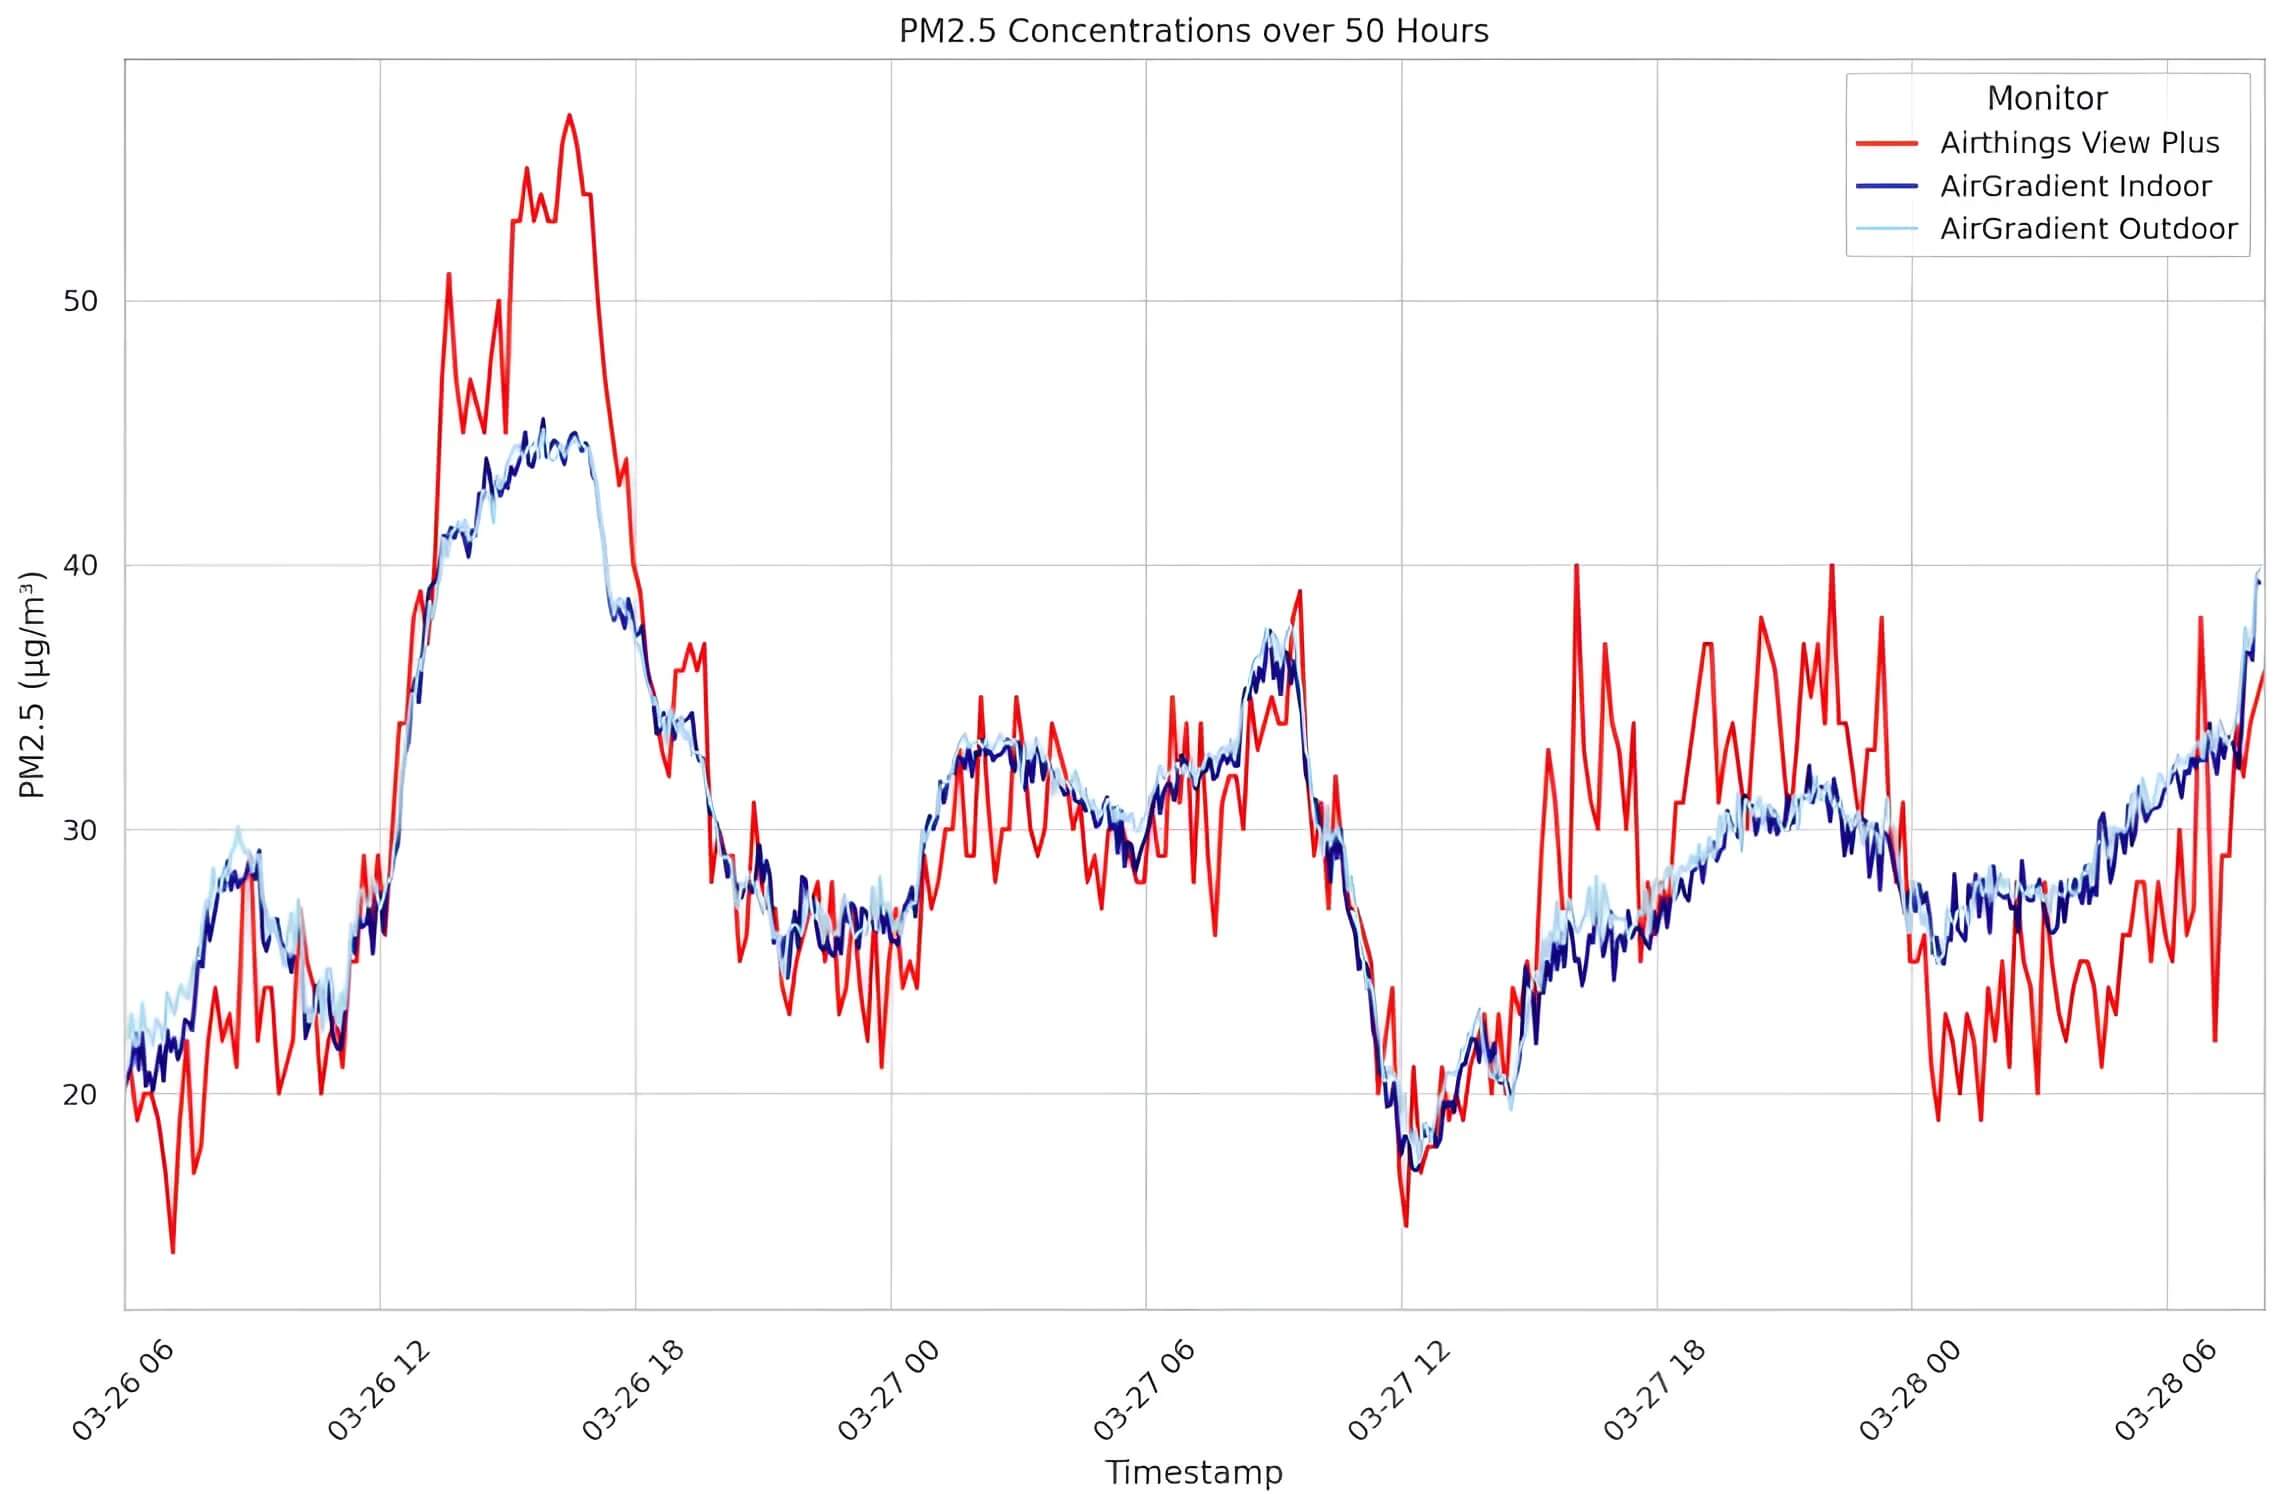 Airthings View Plus PM2.5 Concentrations